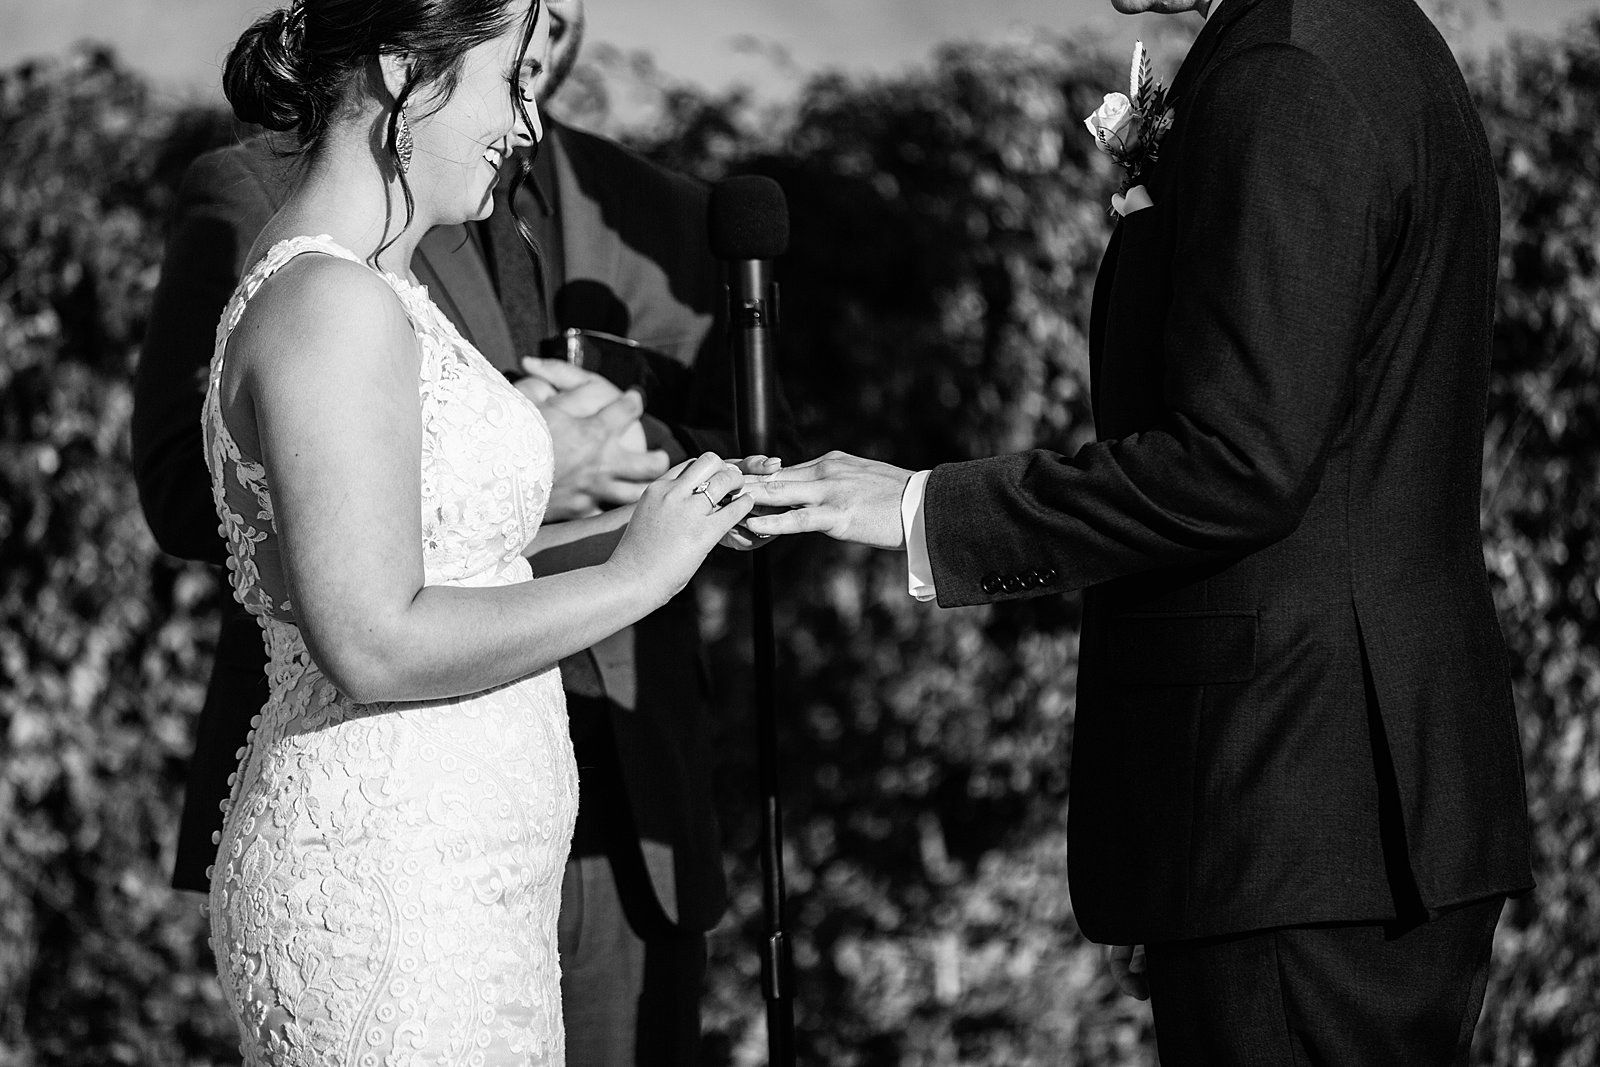 Bride and Groom exchange rings during their wedding ceremony at The Paseo by Phoenix wedding photographer PMA Photography.